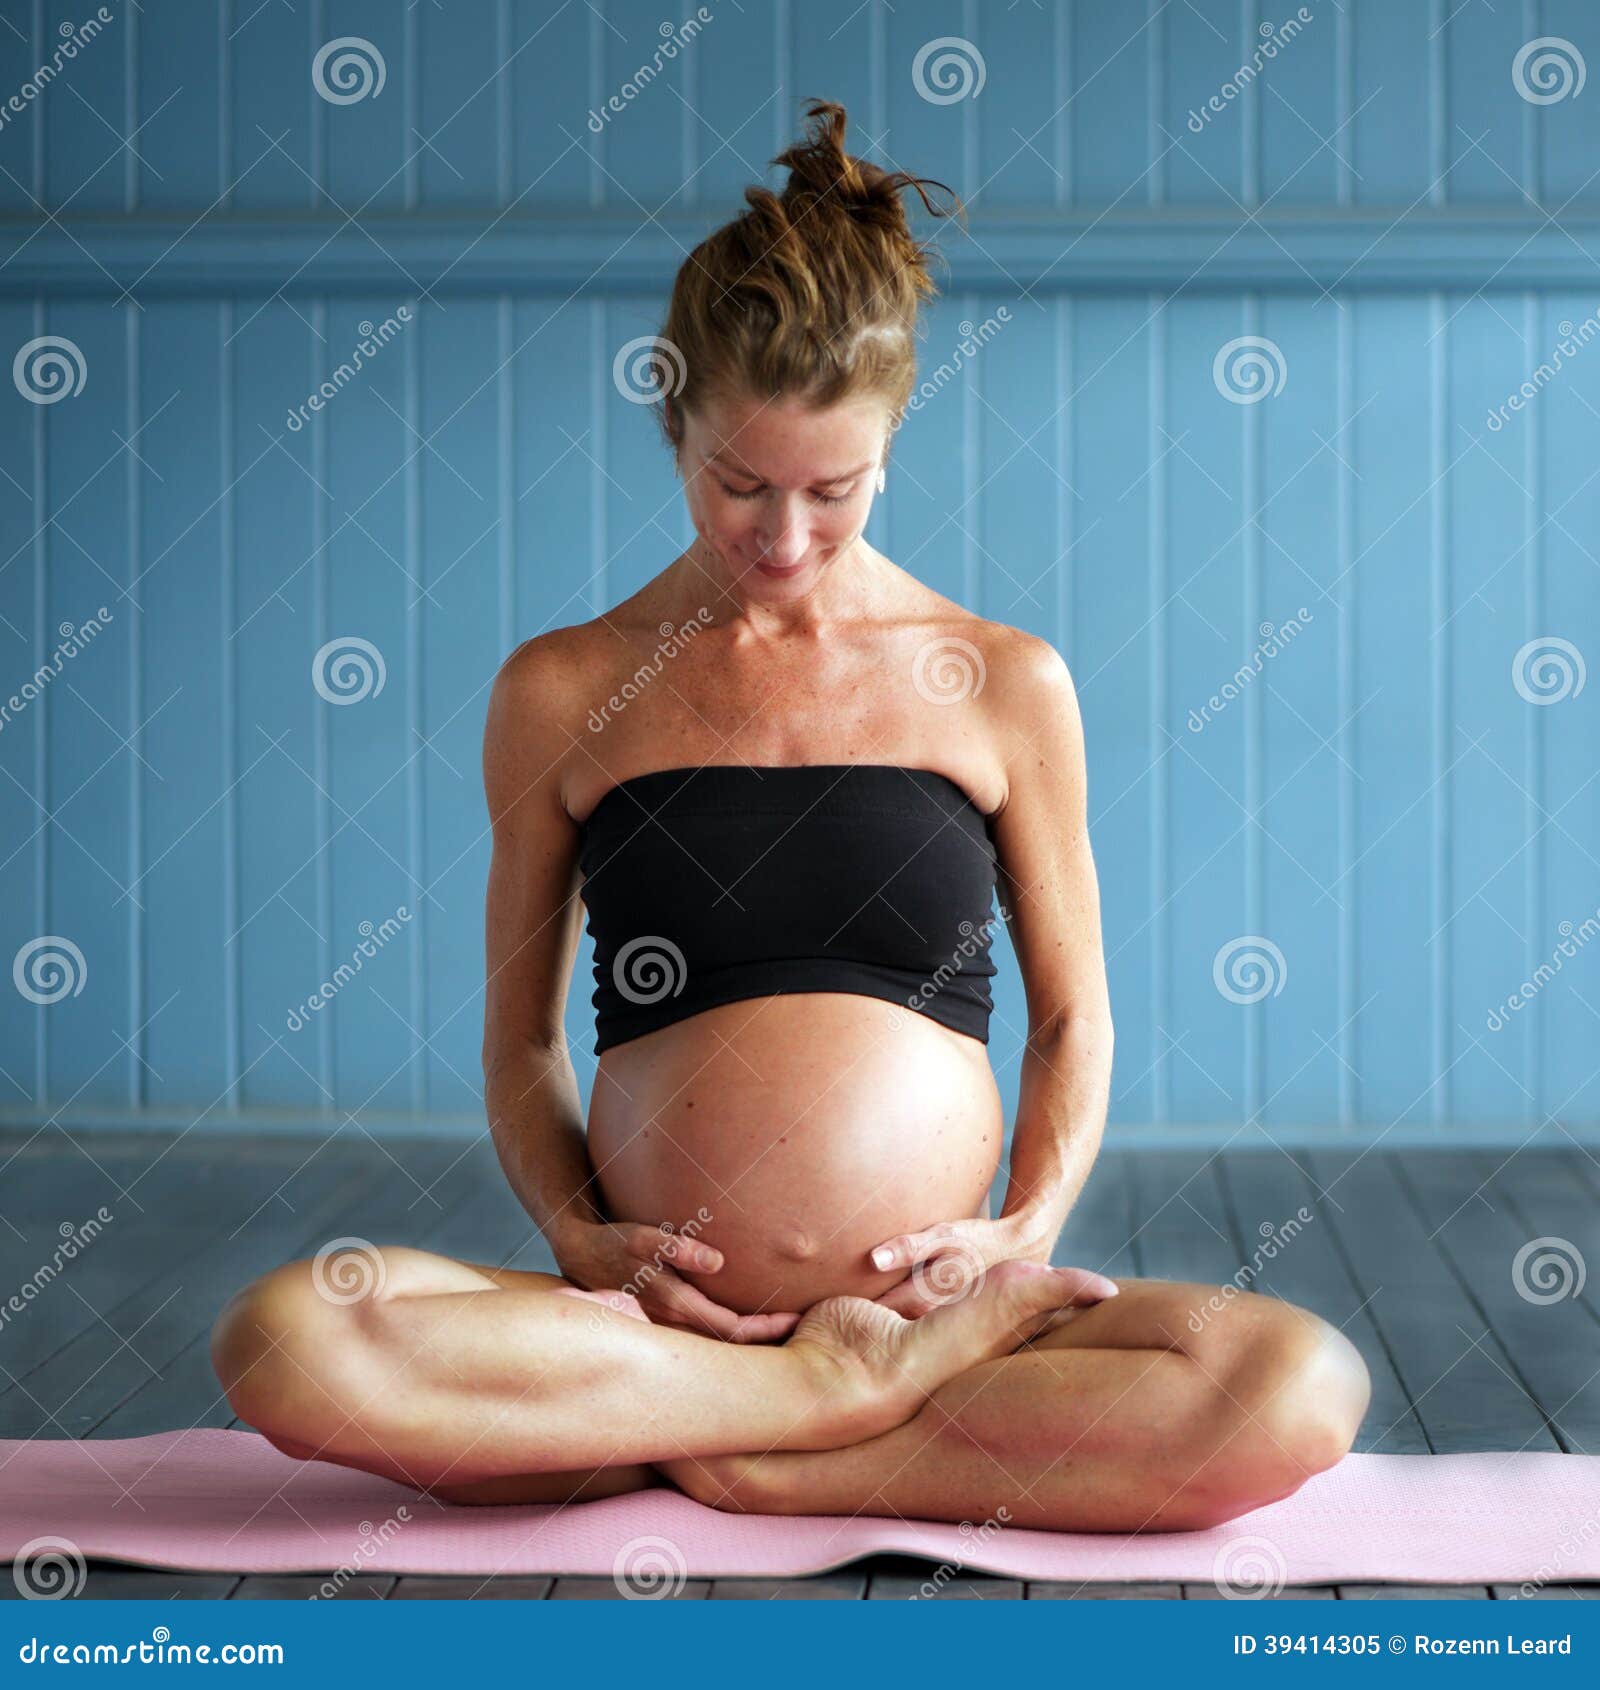 Videos Yoga And Pregnant 9